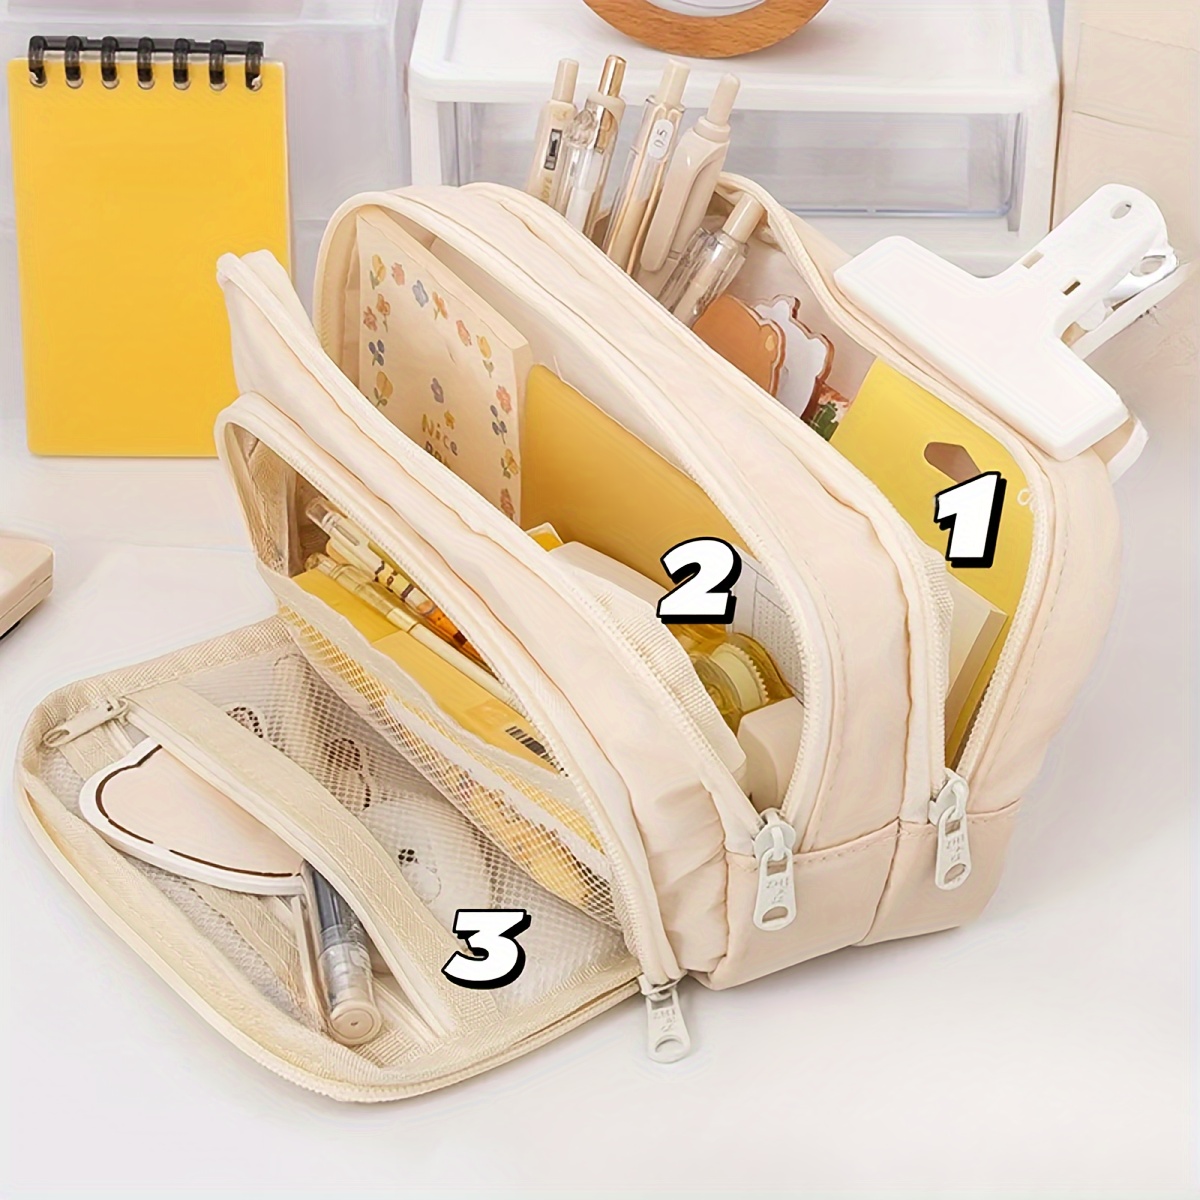 1pc Large Capacity Solid-colored Beige Pencil Case, Ins Style